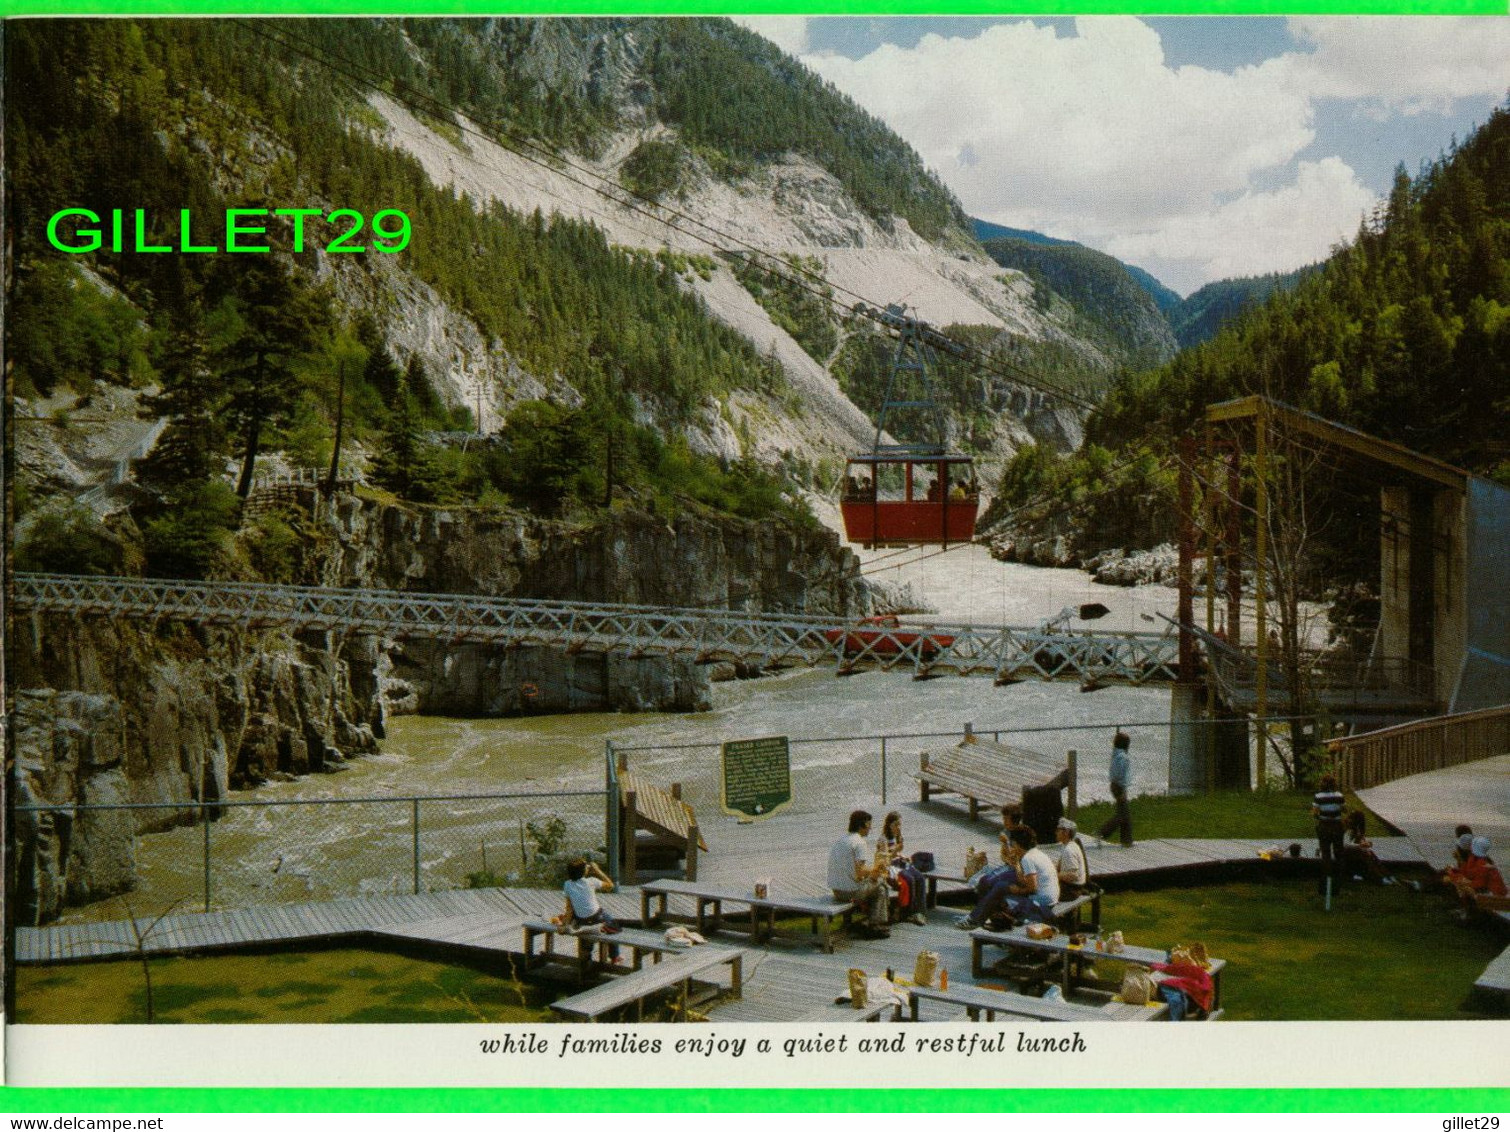 A SOUVENUR ALBUM OF HELL'S GATE AIRTRAM, FRASER CANYON, BC IN 1978 - 20 PAGES - - Noord-Amerika